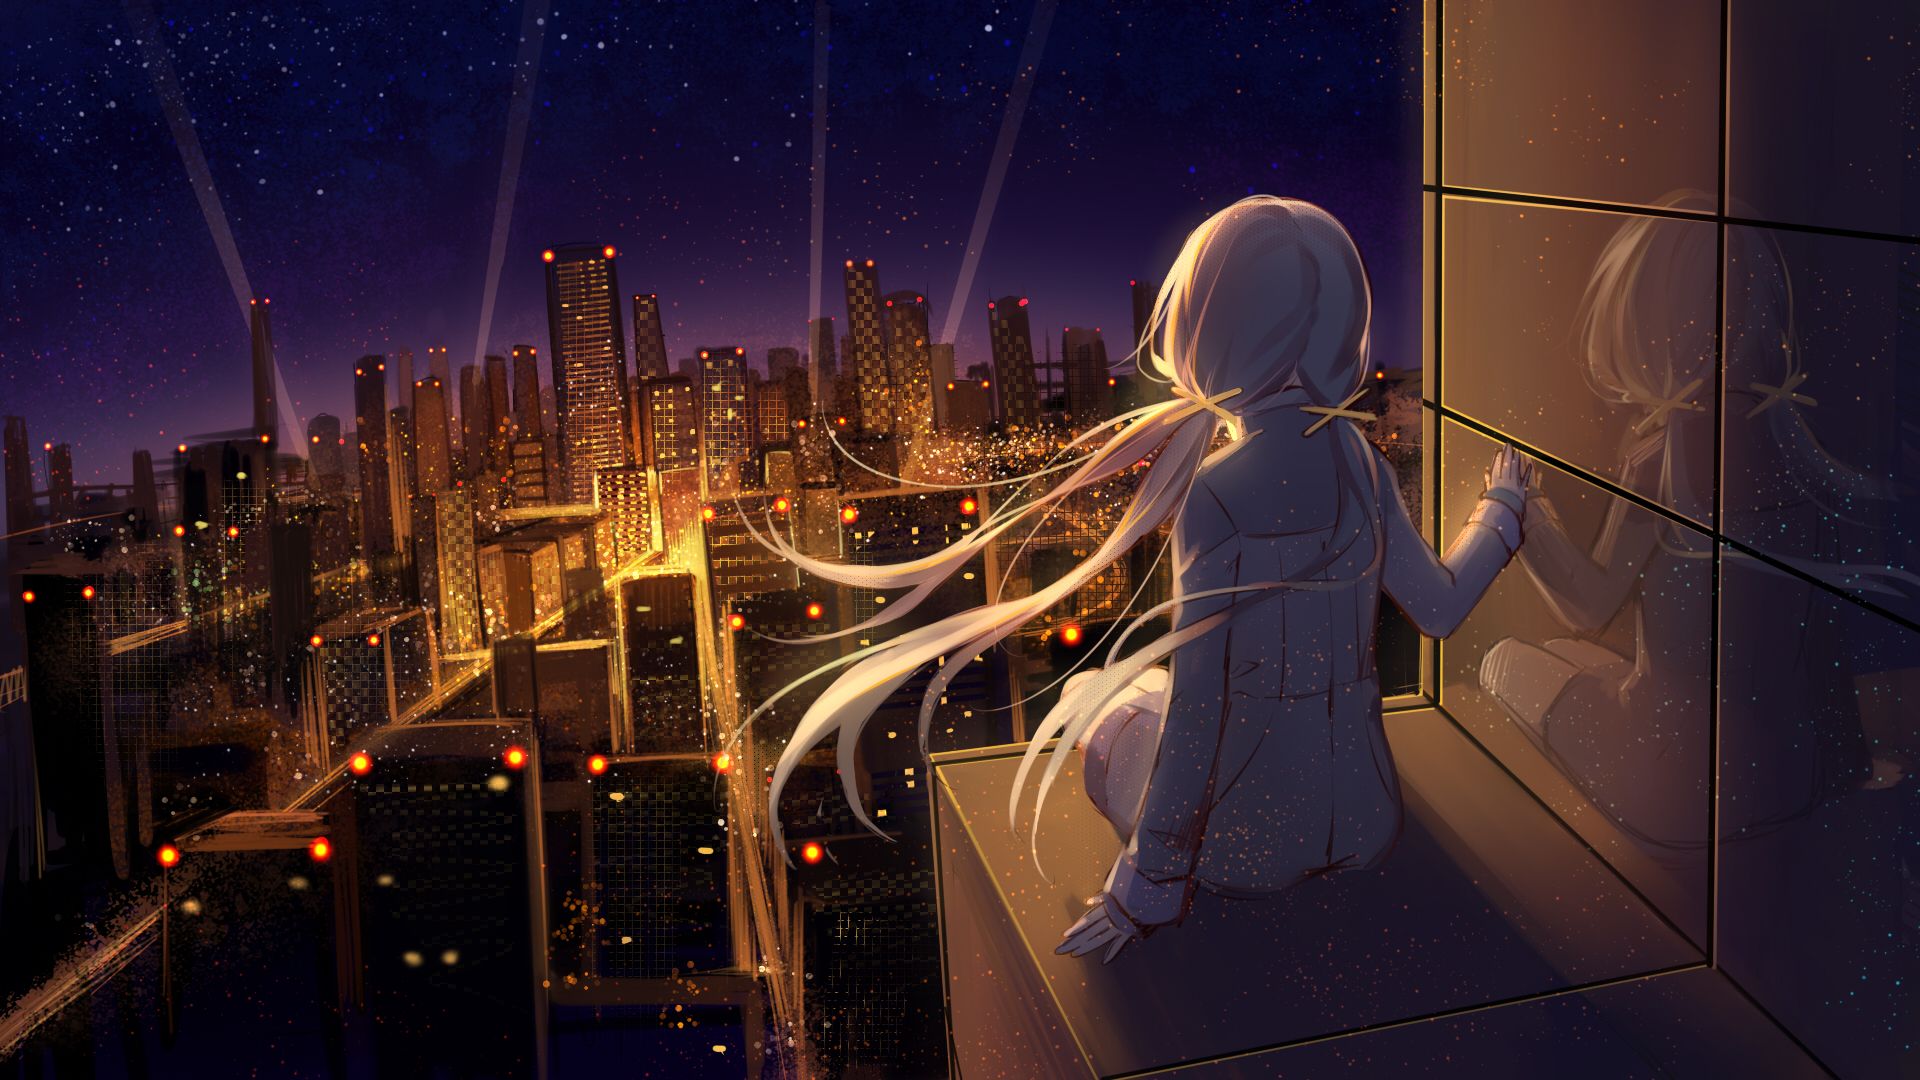 Anime Girl Looking at Stars 1440P Resolution Wallpaper, HD Anime 4K Wallpaper, Image, Photo and Background